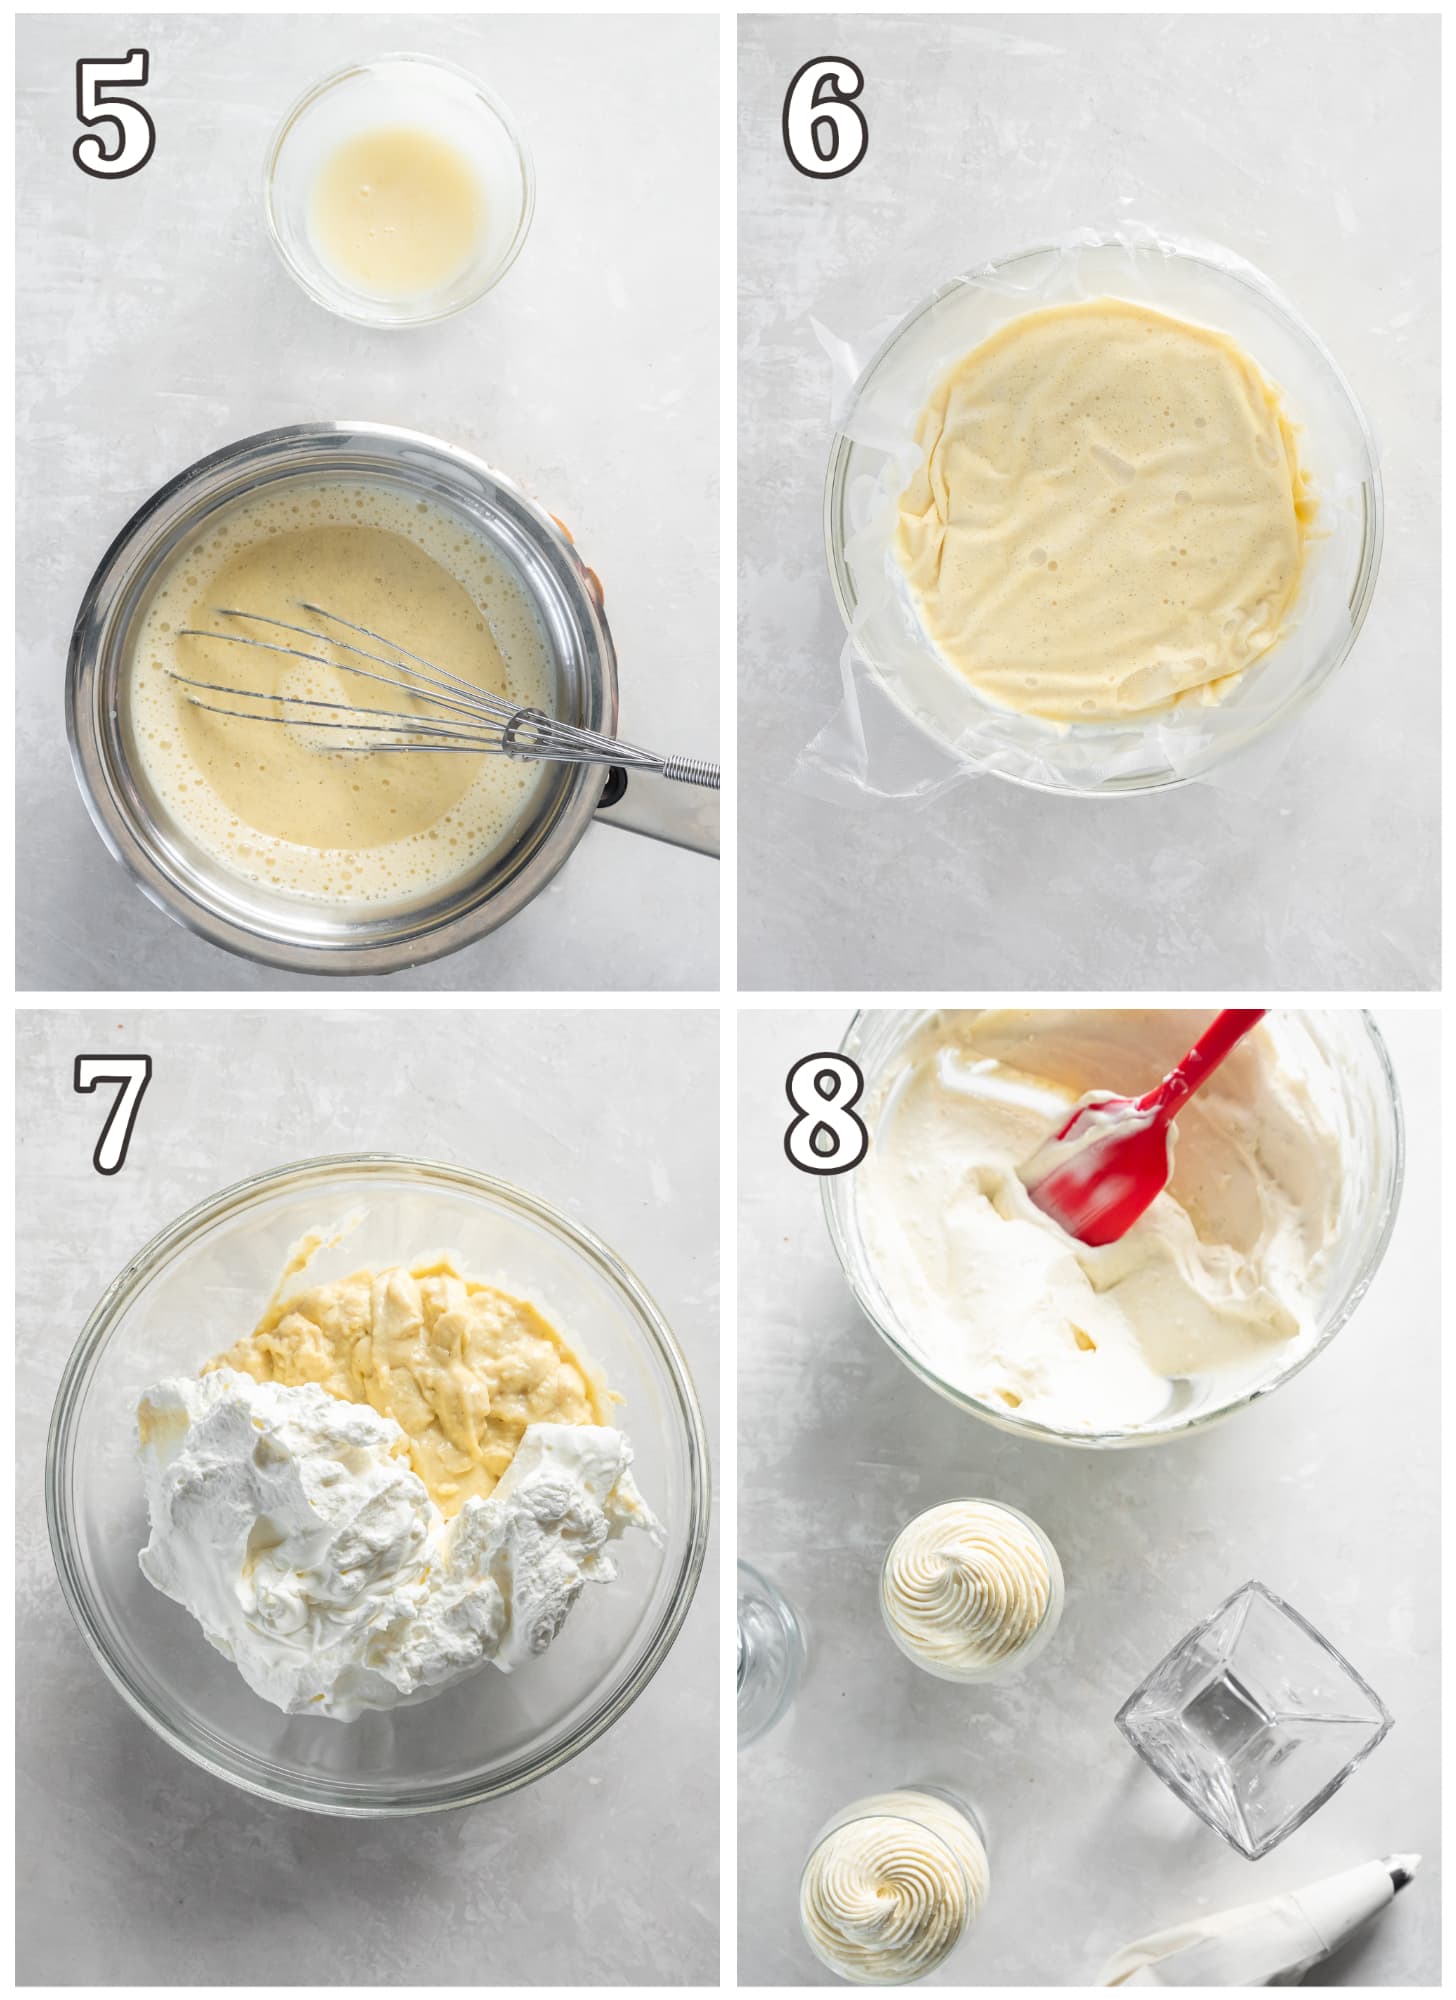 photo collage demonstrating how to make vanilla mousse with whipped cream.